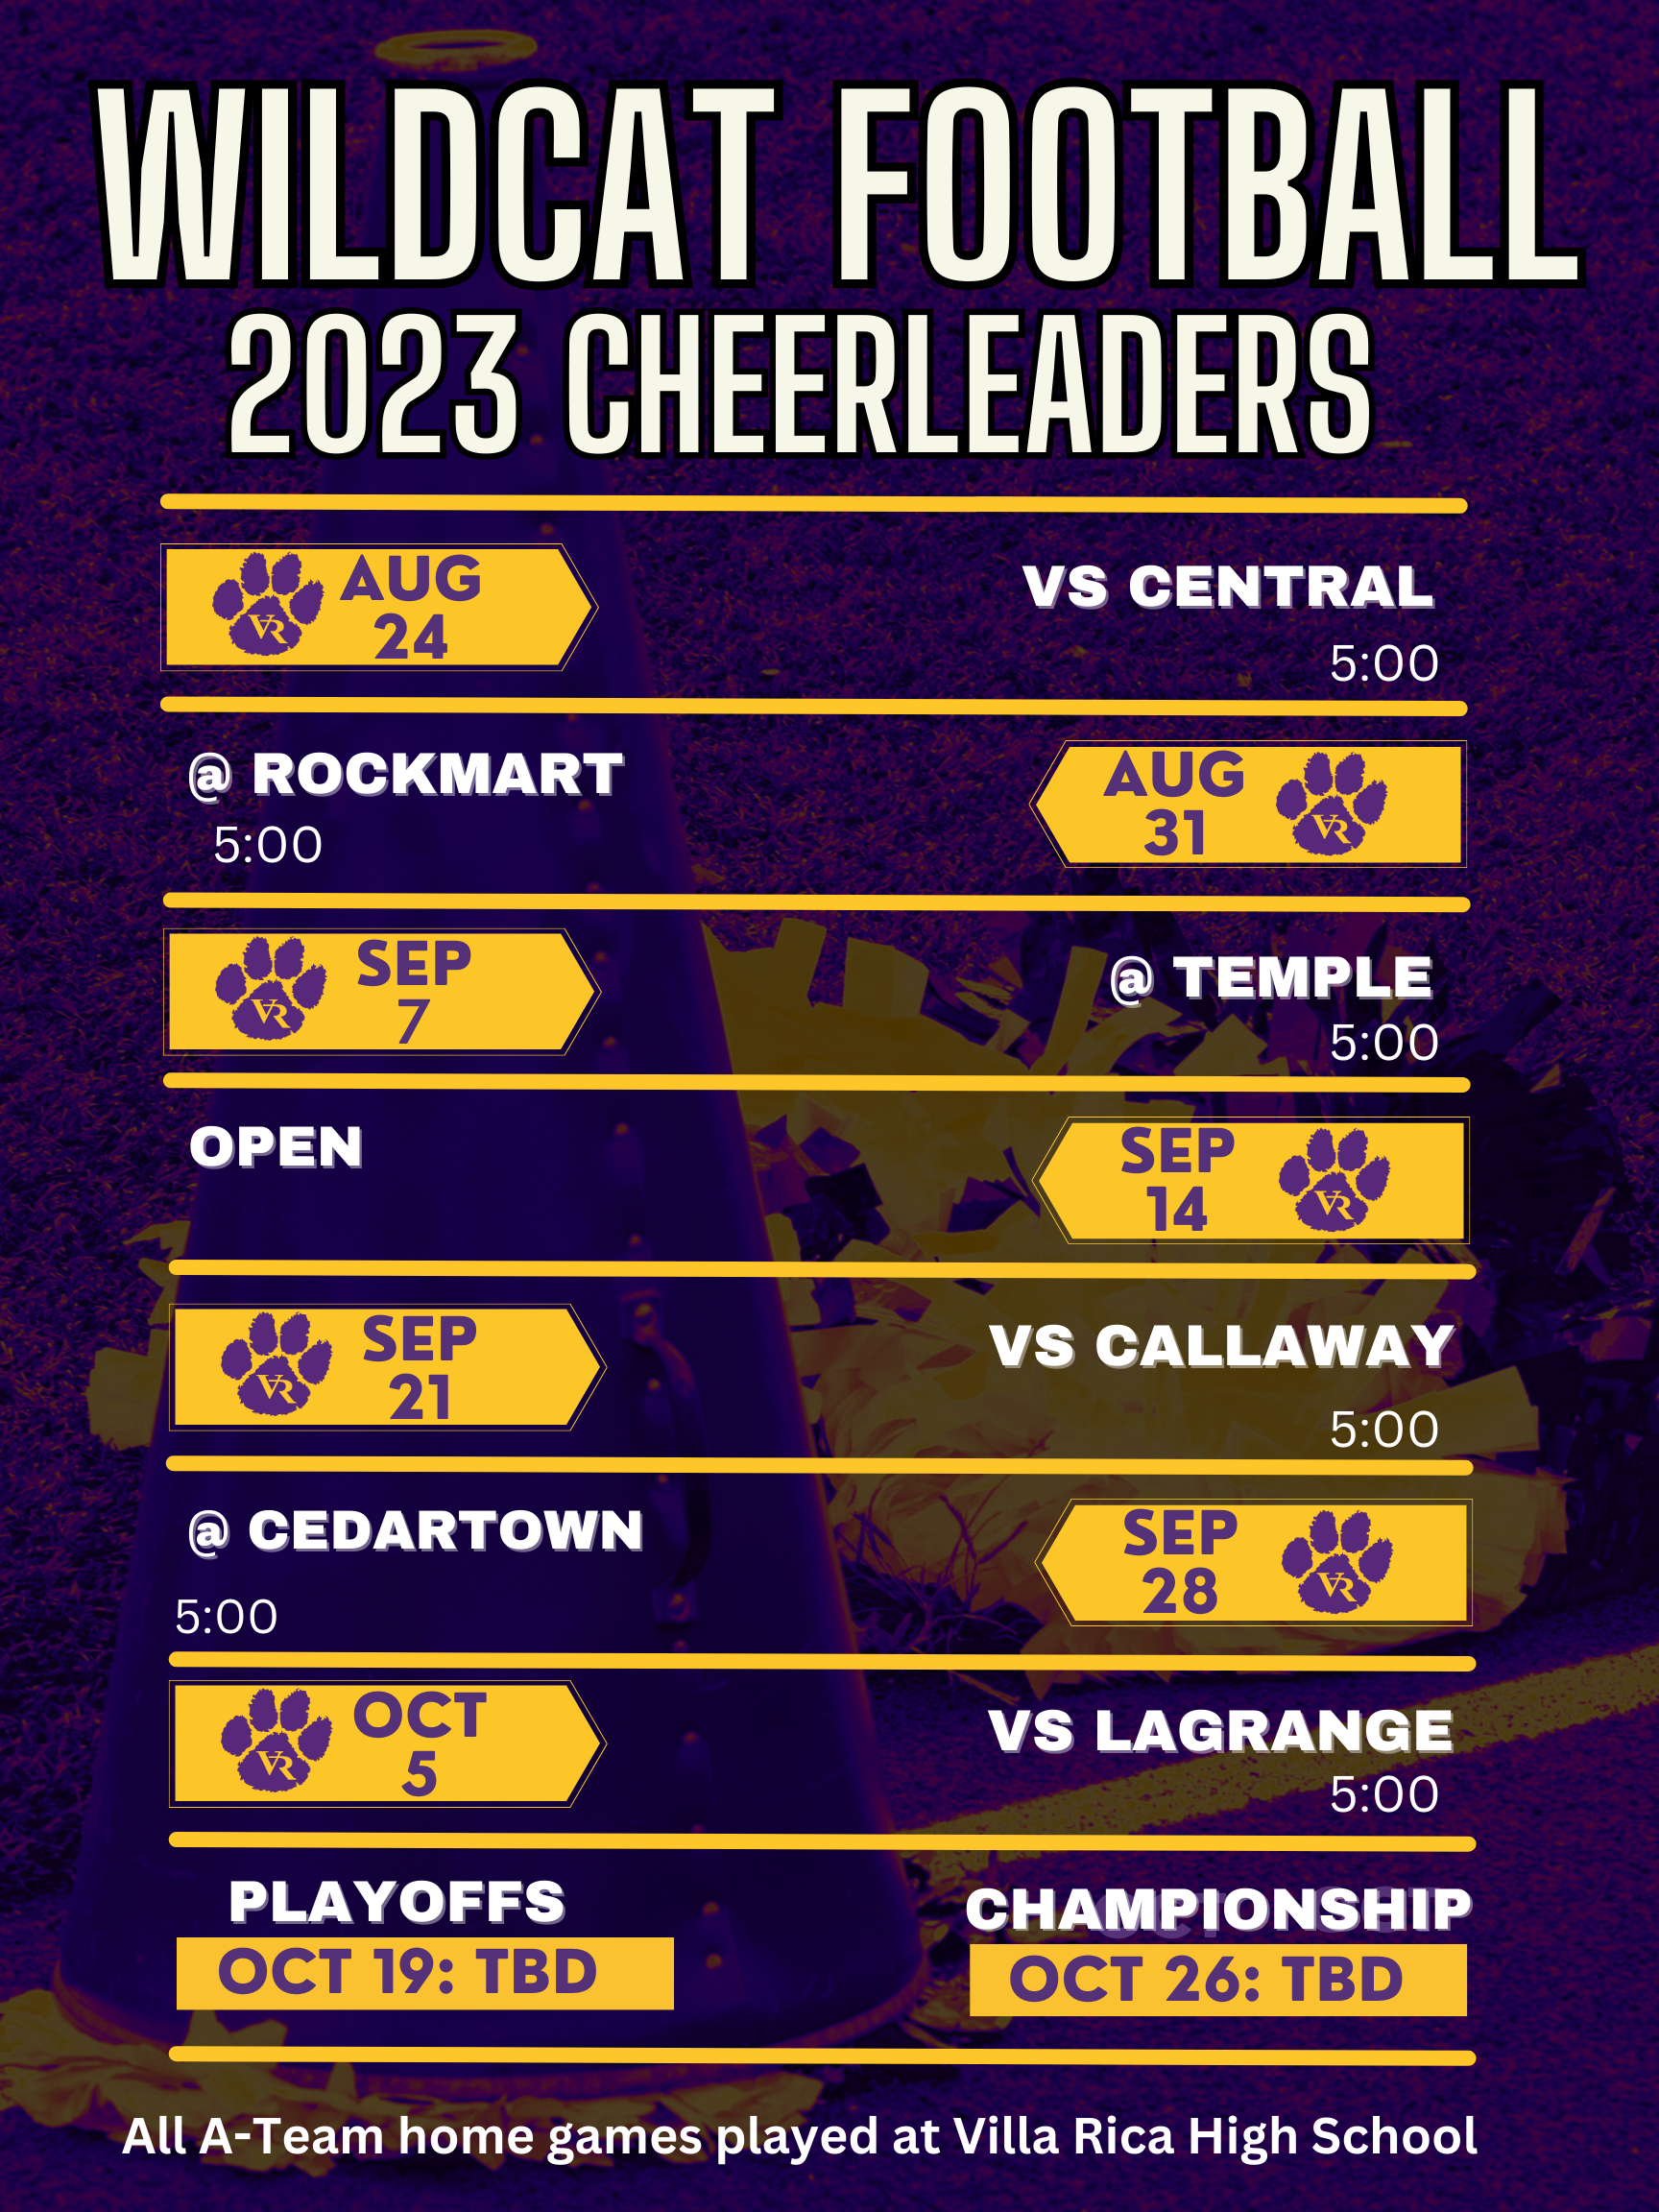 May be an image of football and text that says 'WILDCAT FOOTBALL 2023 CHEERLEADERS AUG 24 vs CENTRAL 5:00 ROCKMART 5:00 AUG 31 SEP 7 OPEN TEMPLE 5:00 SEP 14 SEP 21 @ CEDARTOWN vs CALLAWAY 5:00 5:00 SEP 28 OCT 5 vs LAGRANGE 5:00 PLAYOFFS OCT 19: TBD CHAMPIONSHIP OCT 26: TBD AlLA-Team home games played at Villa Rica High School'